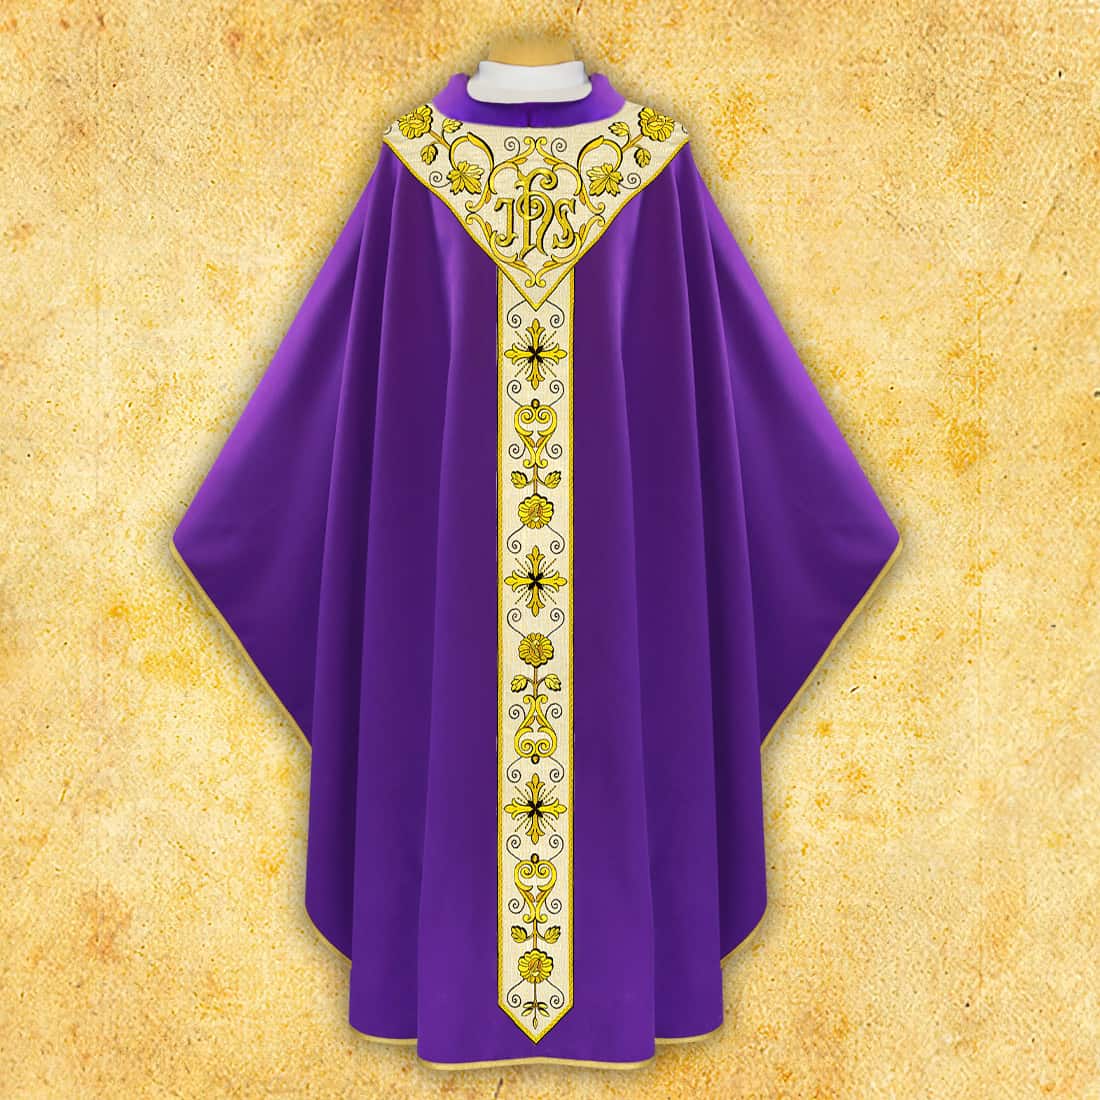 Embroidered chasuble "Gaudete"